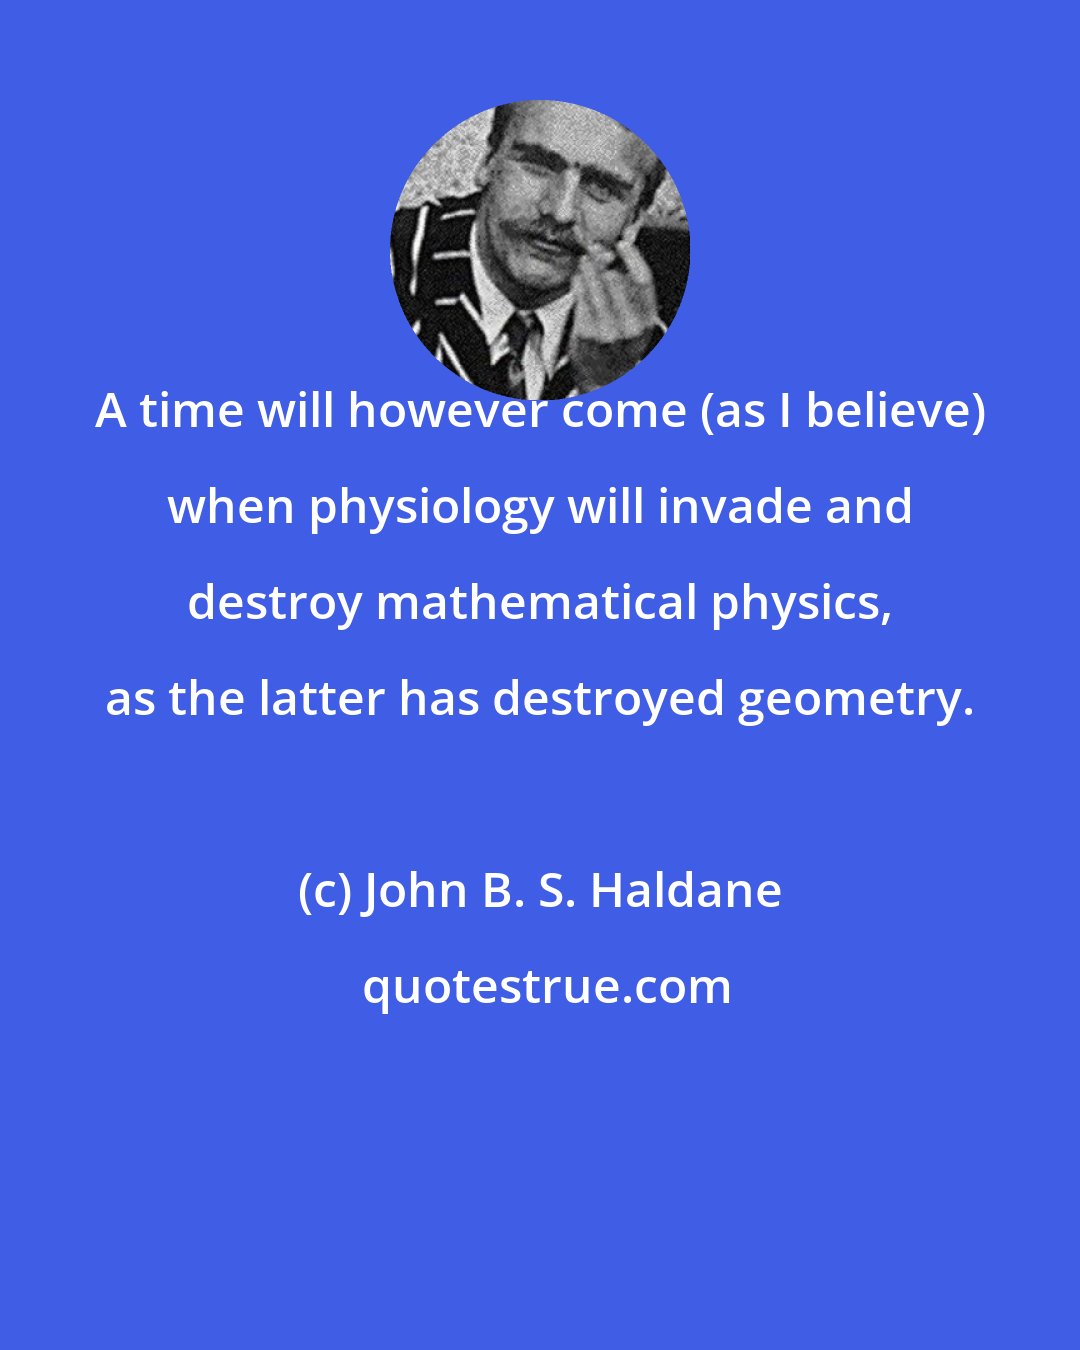 John B. S. Haldane: A time will however come (as I believe) when physiology will invade and destroy mathematical physics, as the latter has destroyed geometry.